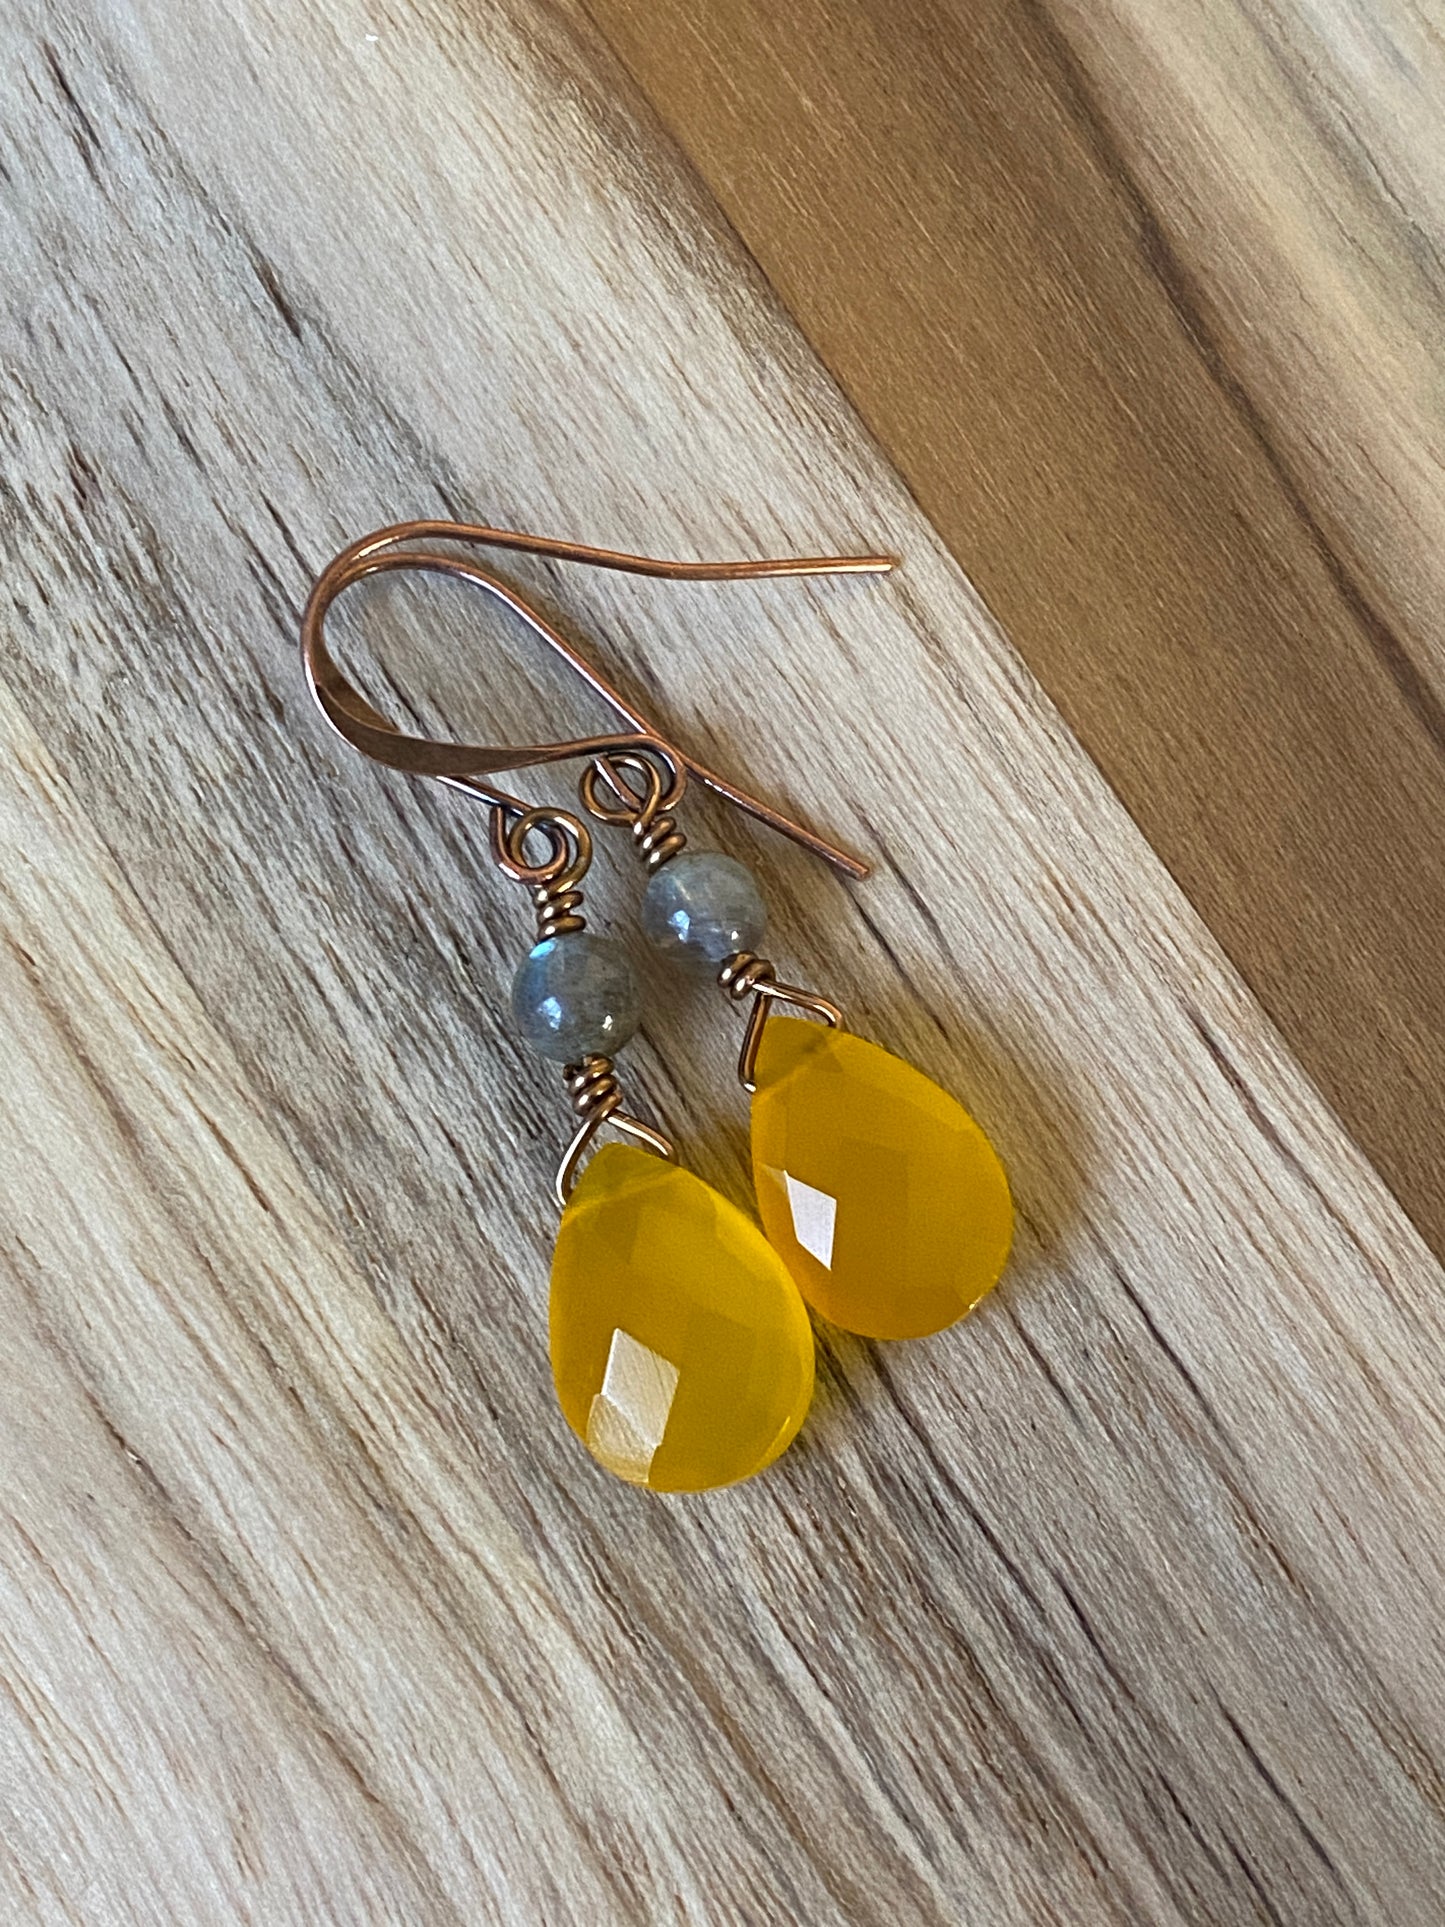 Mango Yellow Onyx Briolette Dangle Earrings with Labradorite and Copper